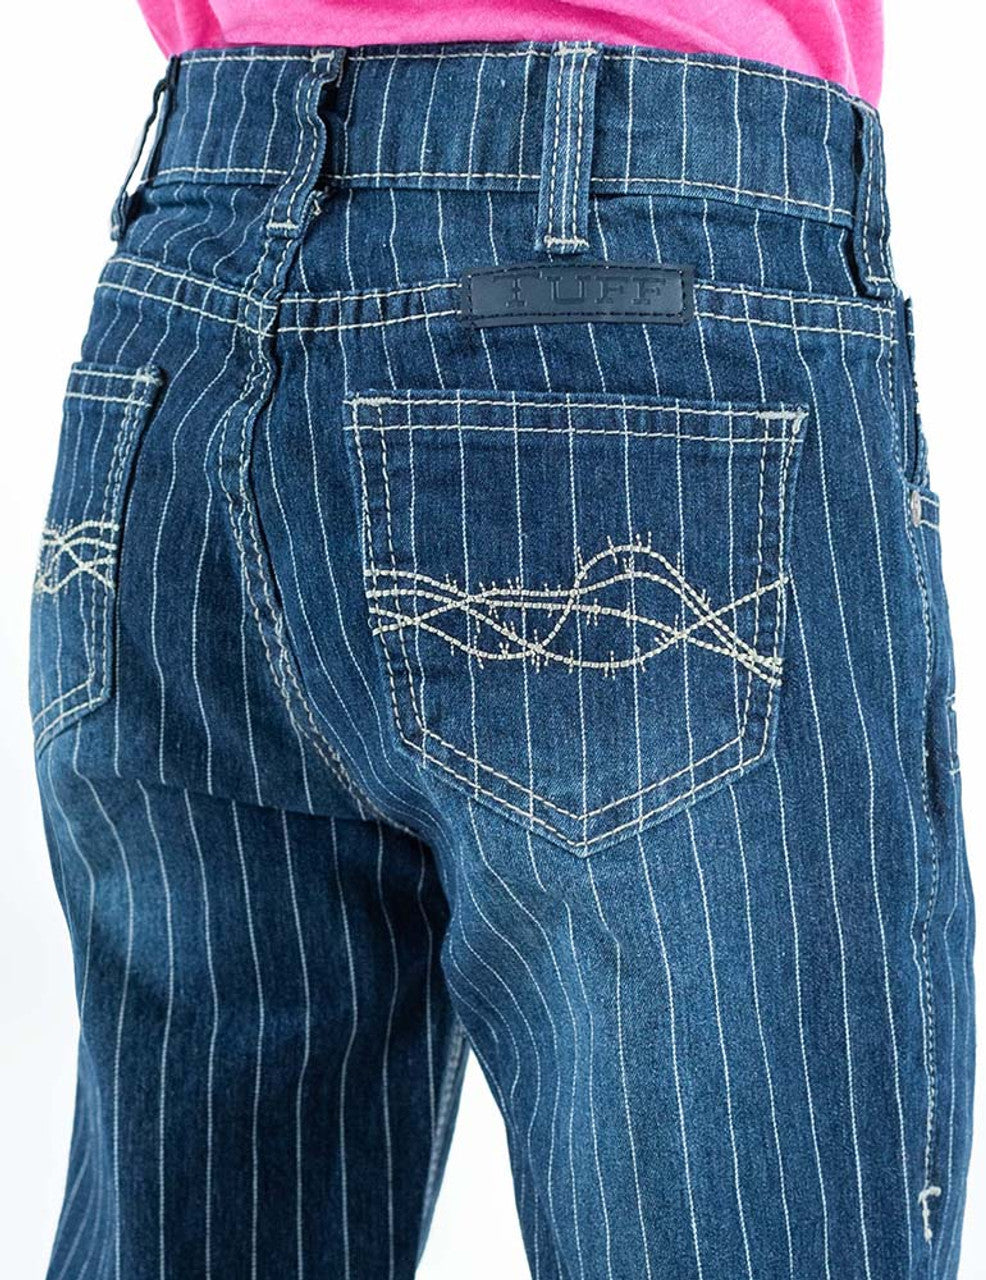 The Cowgirl Tuff Girl's Streamline Jeans